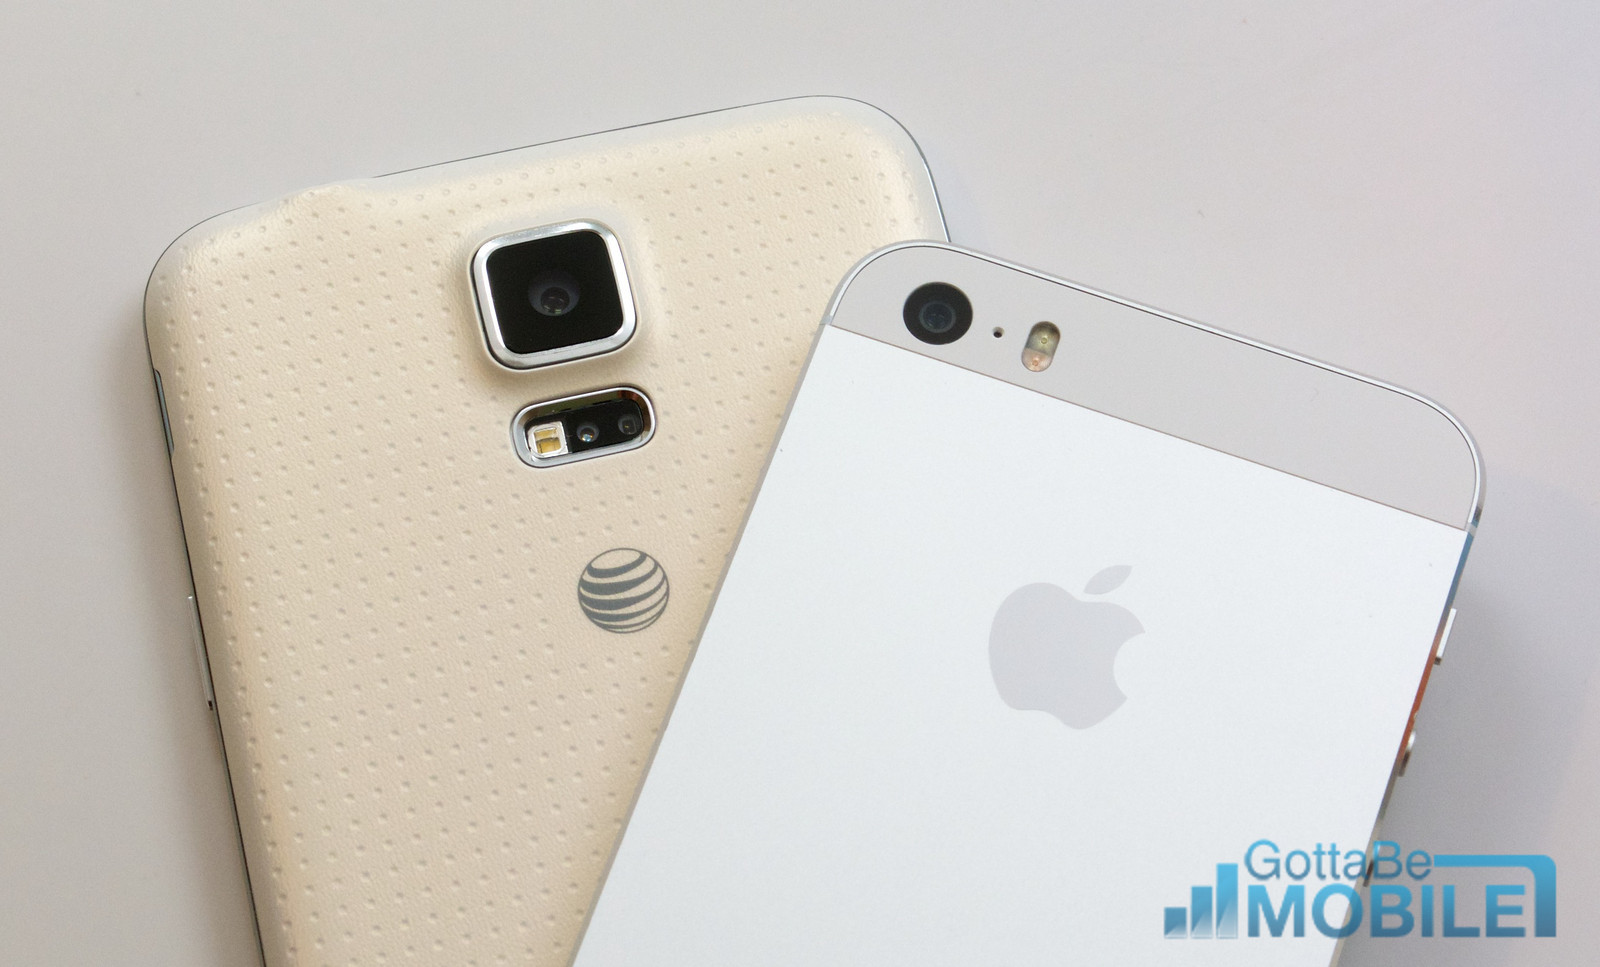 With this information you can pick between the Galaxy S5 and the iPhone 5s as your next phone.